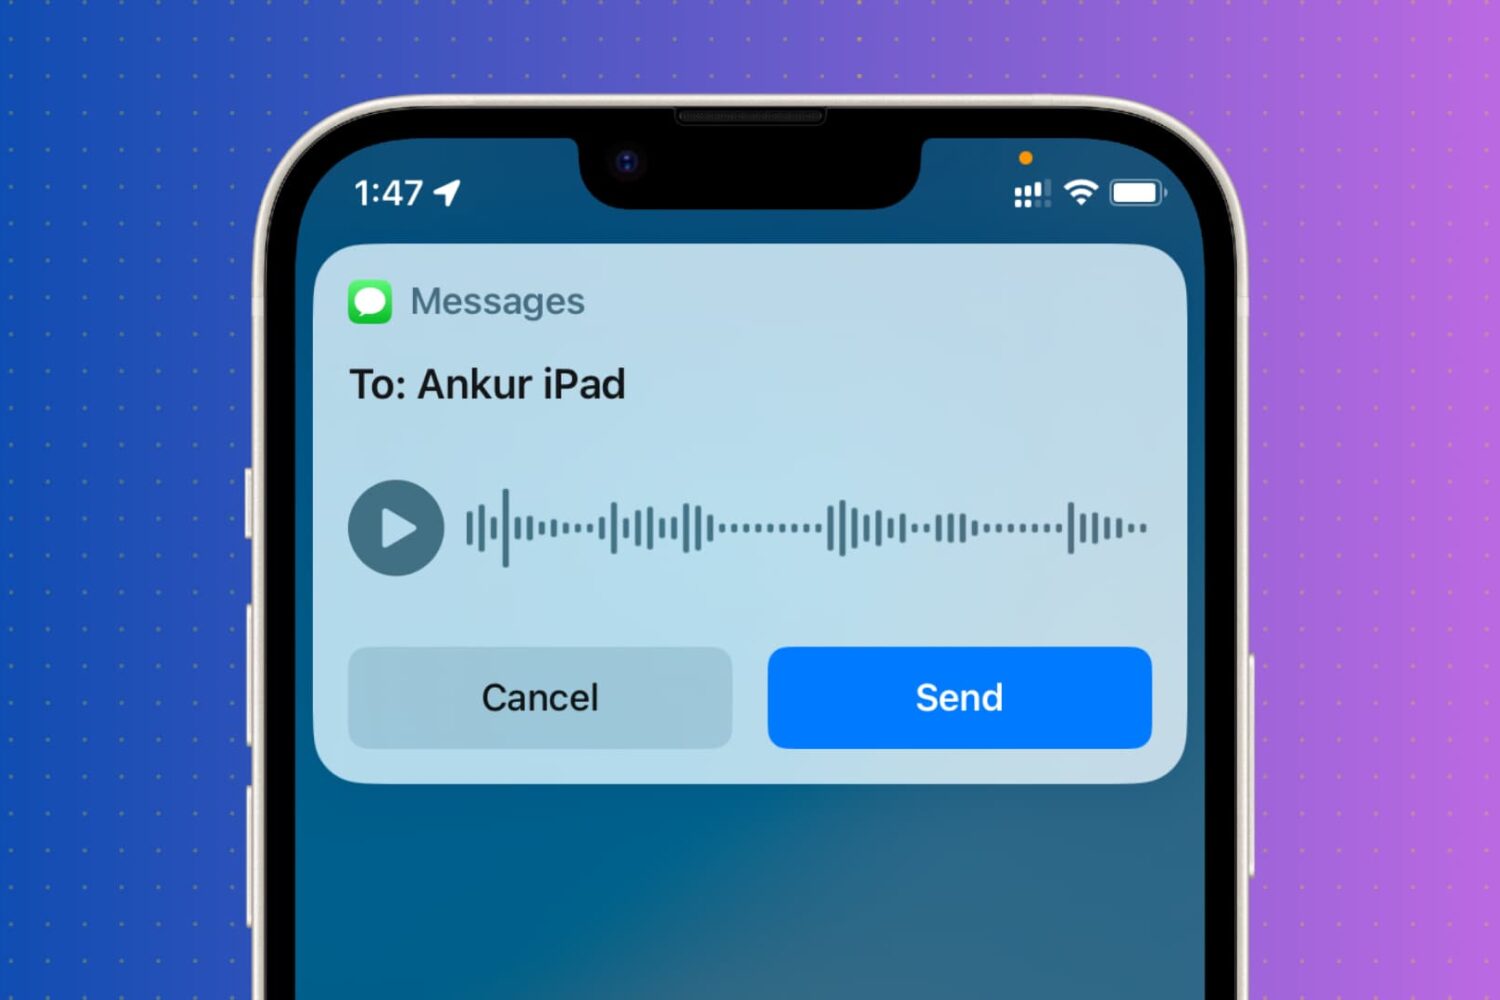 Sending a audio message using Siri from iPhone